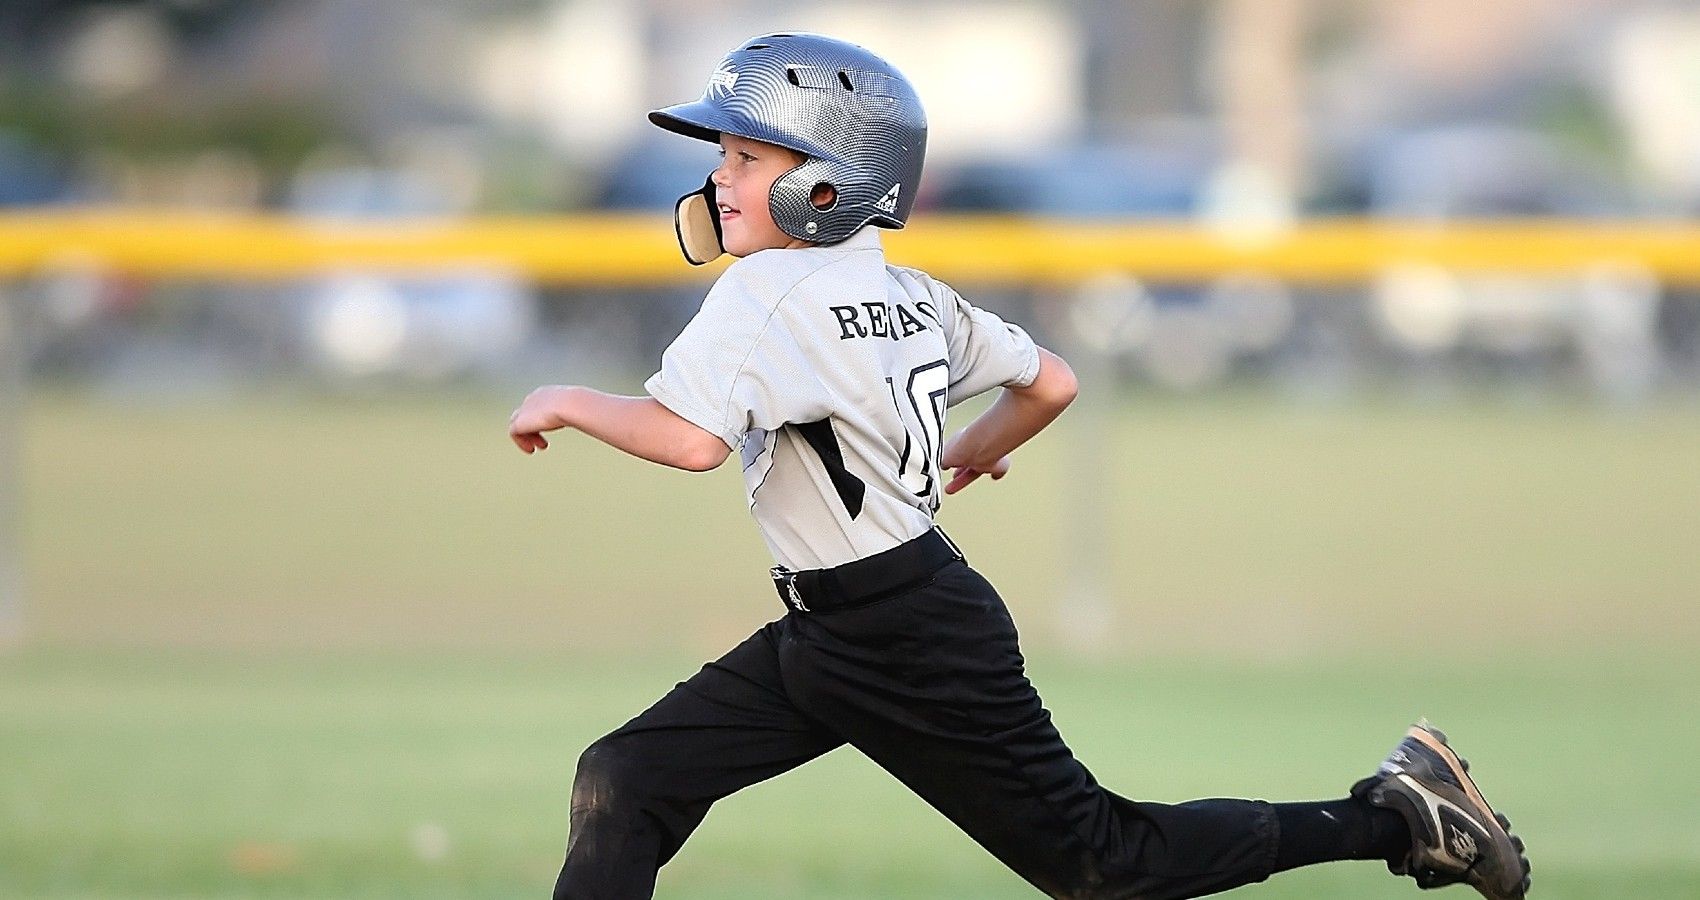 Parent's Barriers To Sports For Their Children Has Been Identified